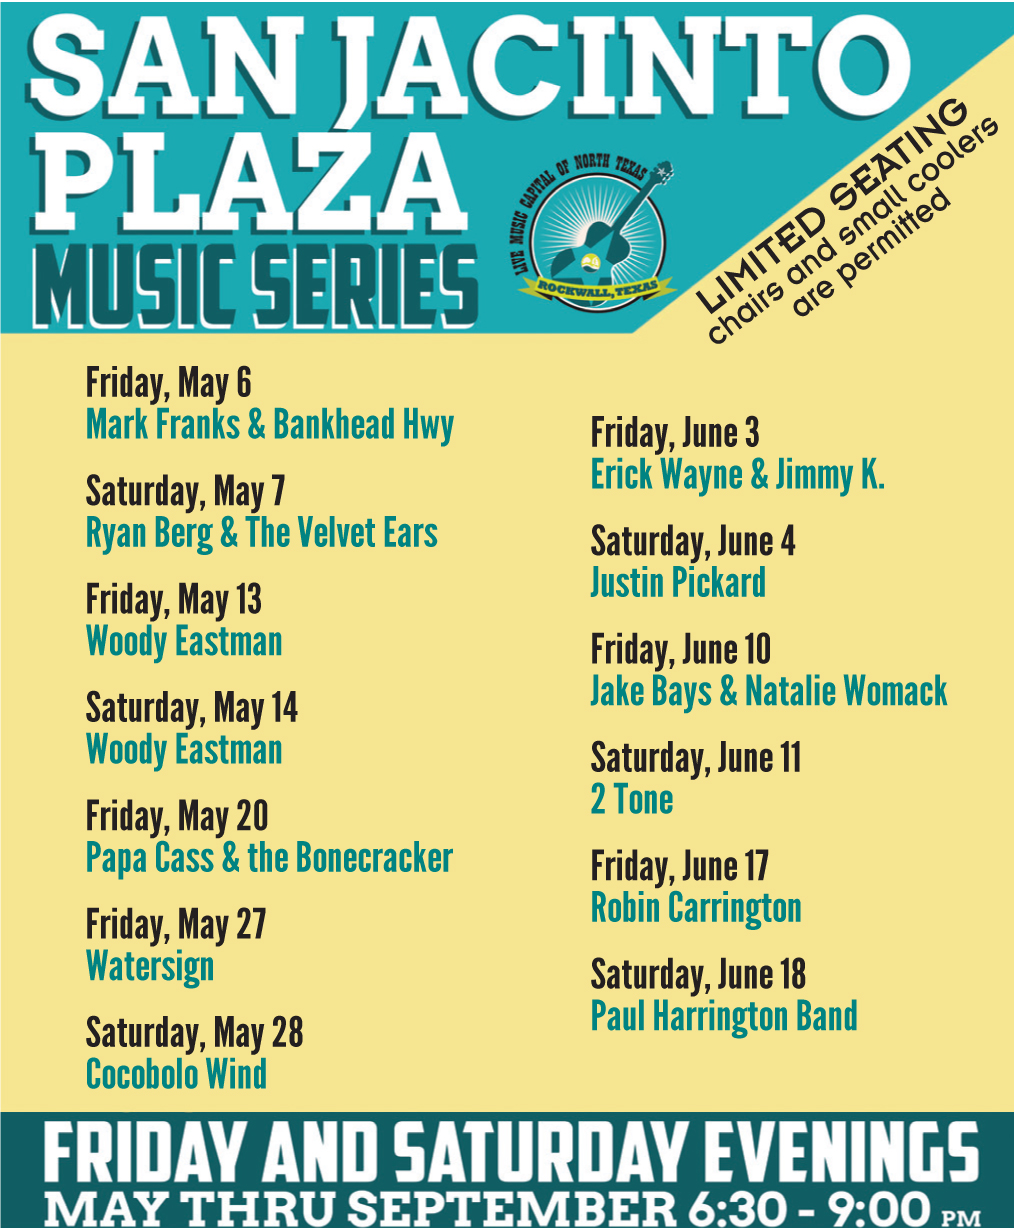 San Jacinto Plaza Music Series, Farmers Market opens in downtown